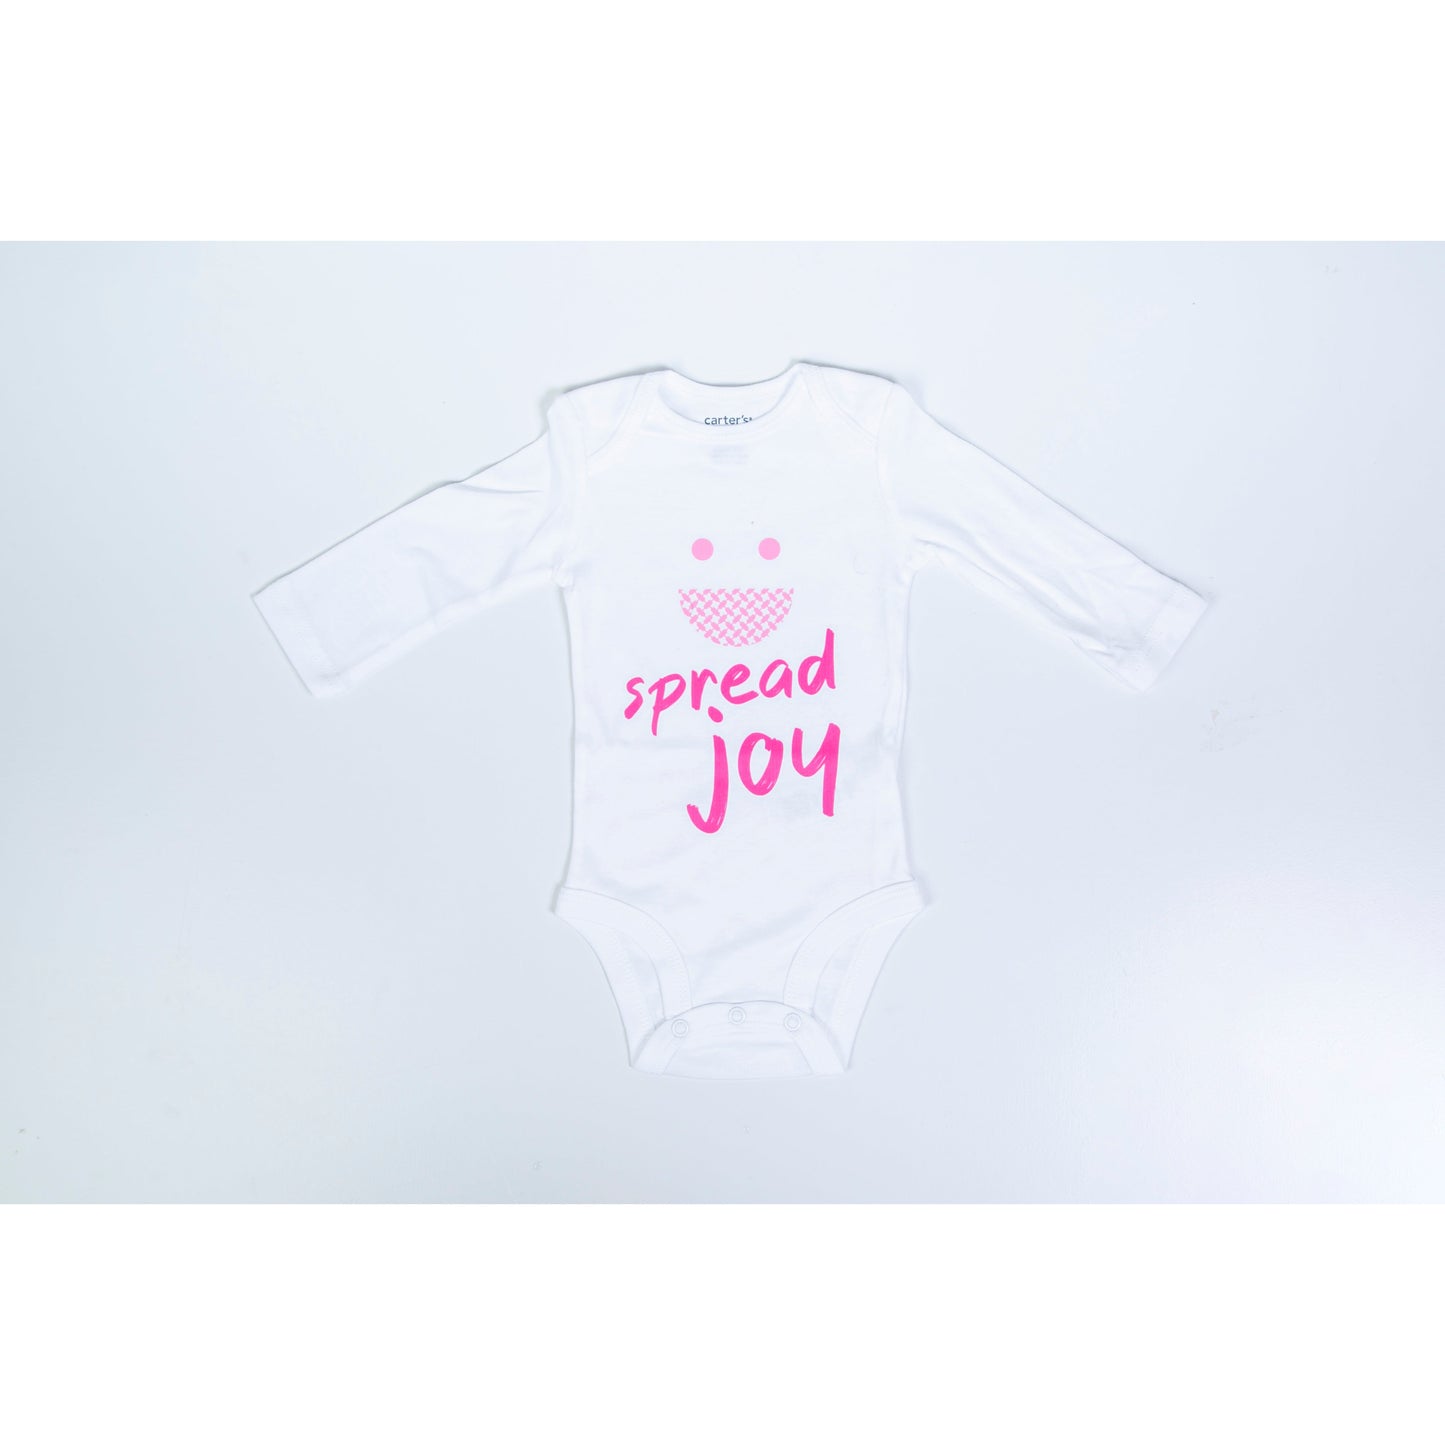 Onesie in white color - Spread joy  - Breast cancer